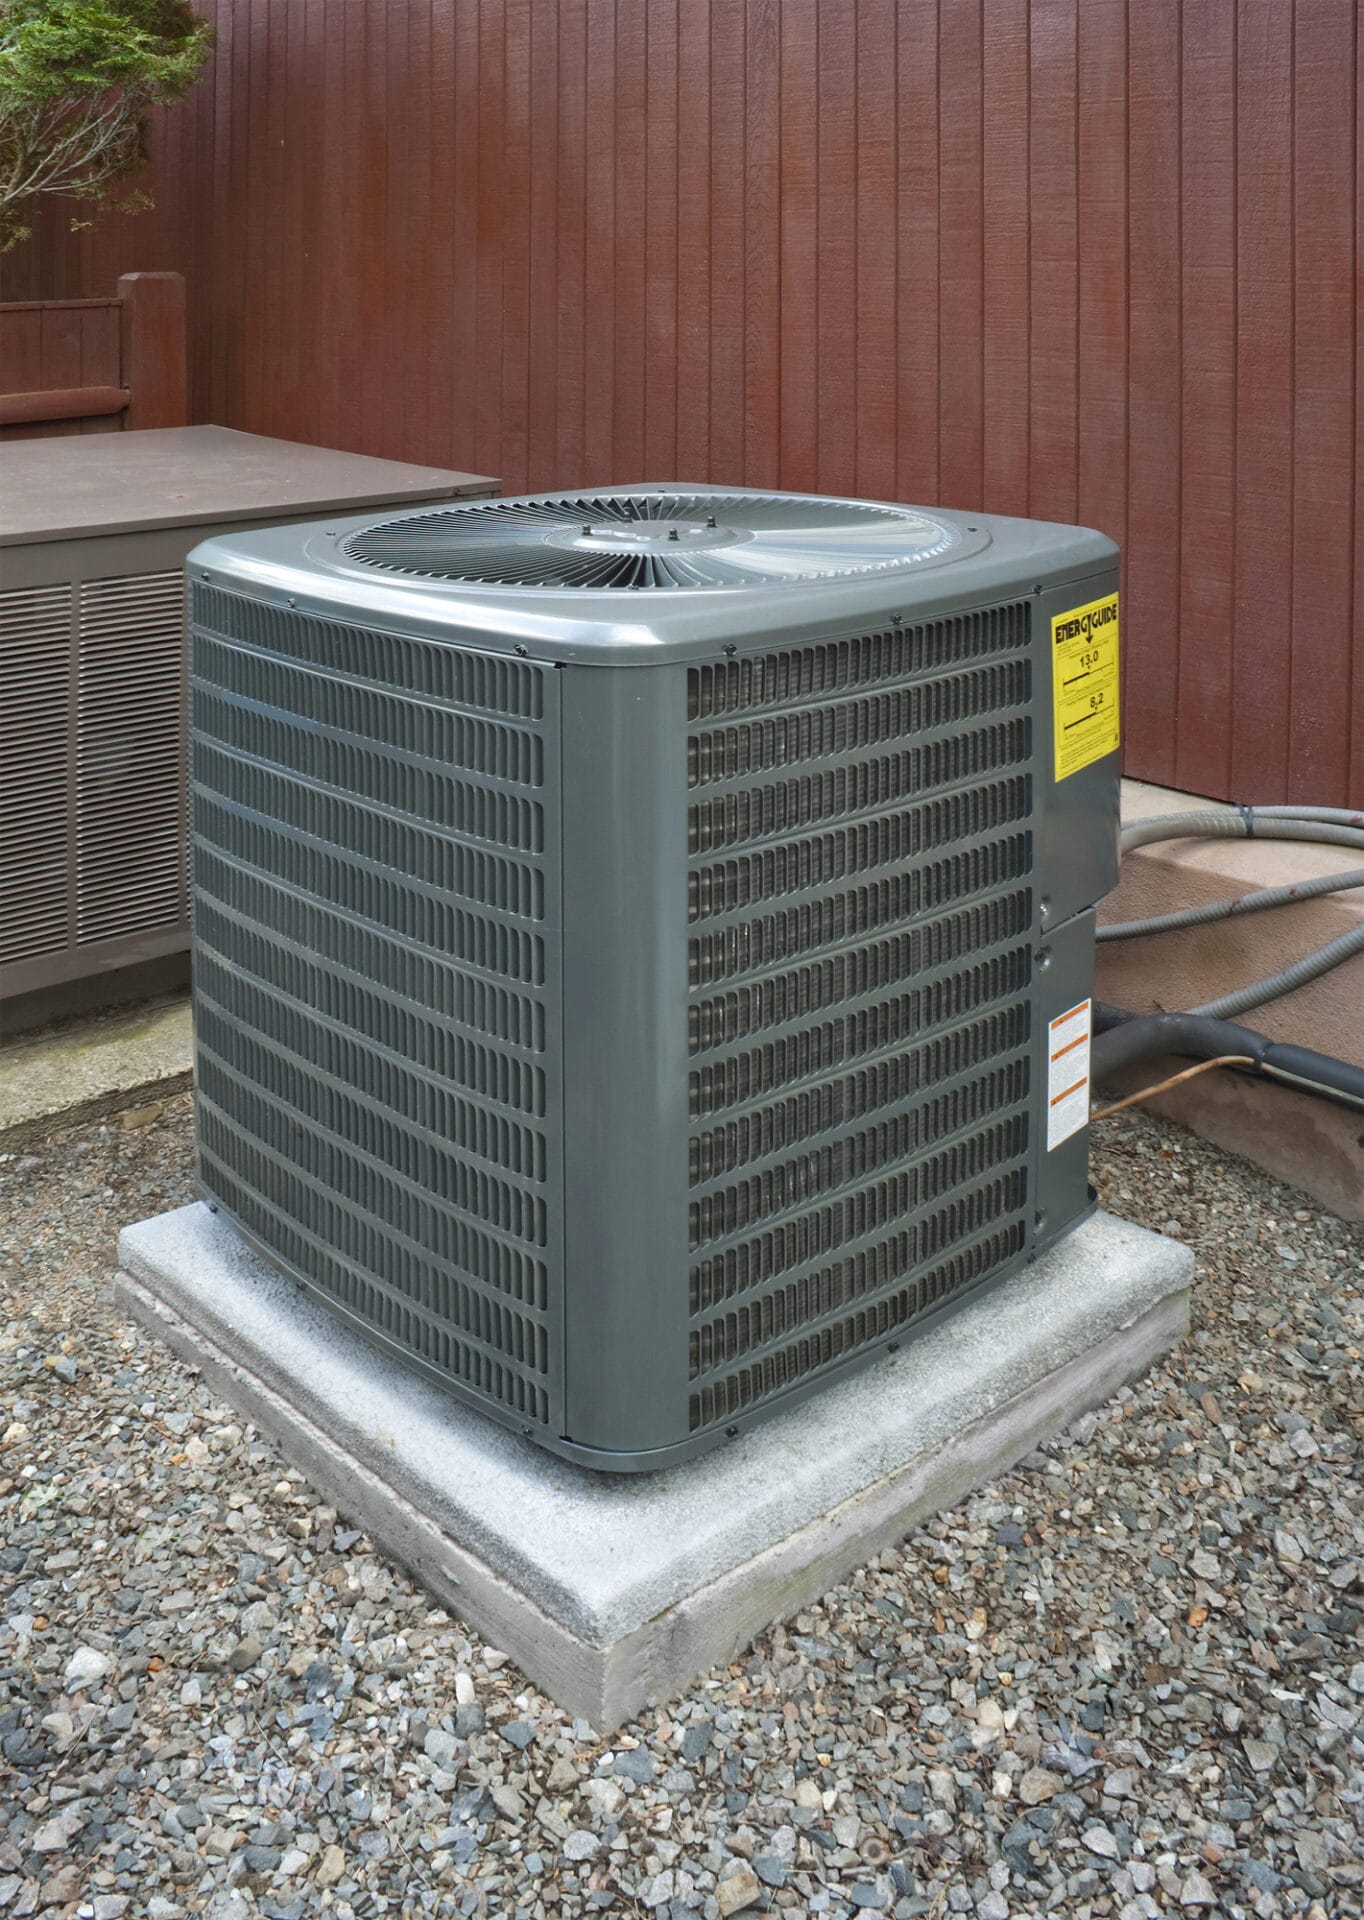 Outdoor central air conditioning unit on a concrete pad with gravel and a wooden fence in the background,